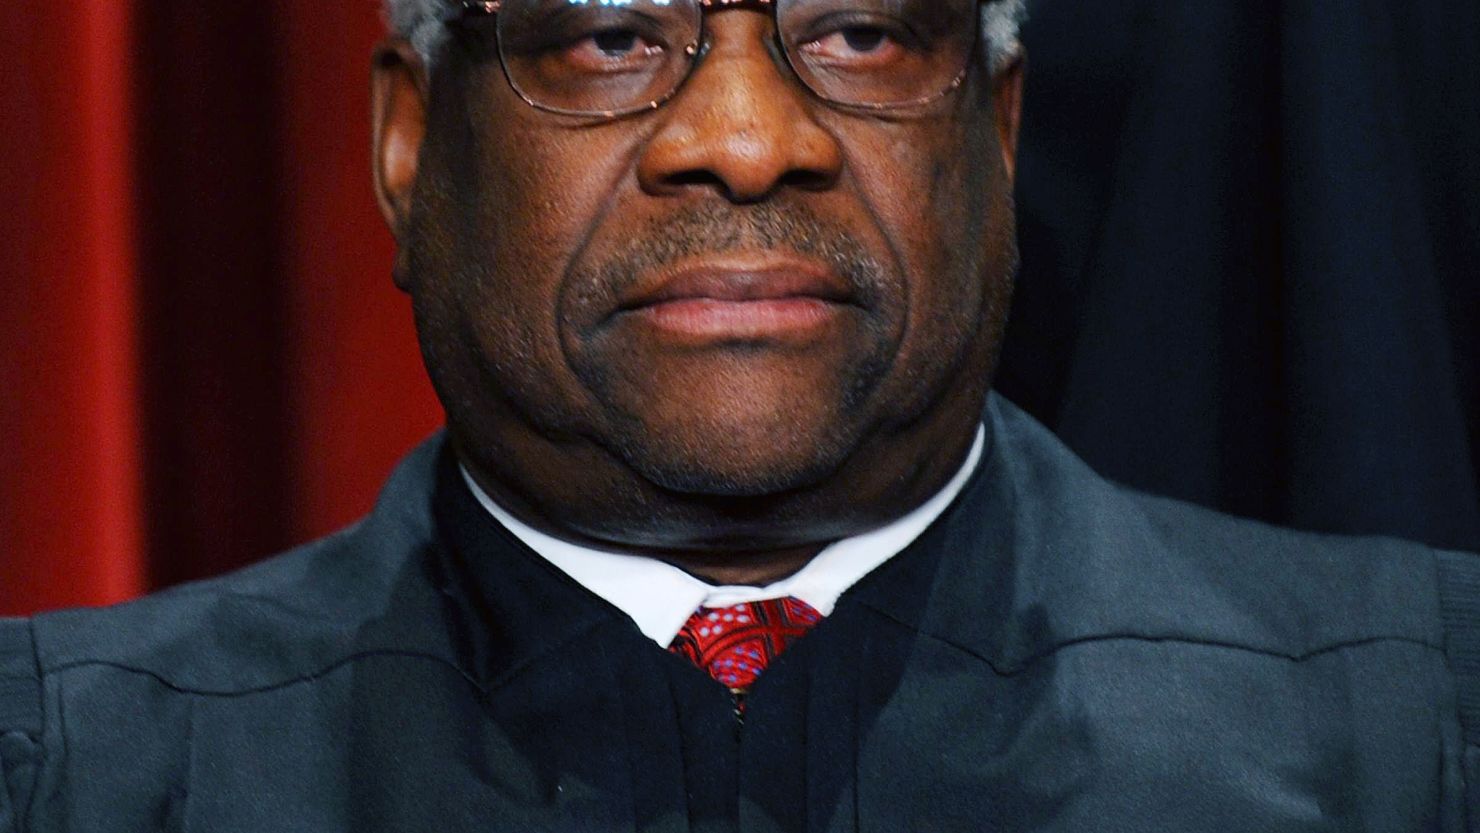 Justice Clarence Thomas, 63, is marking two decades on the Supreme Court.